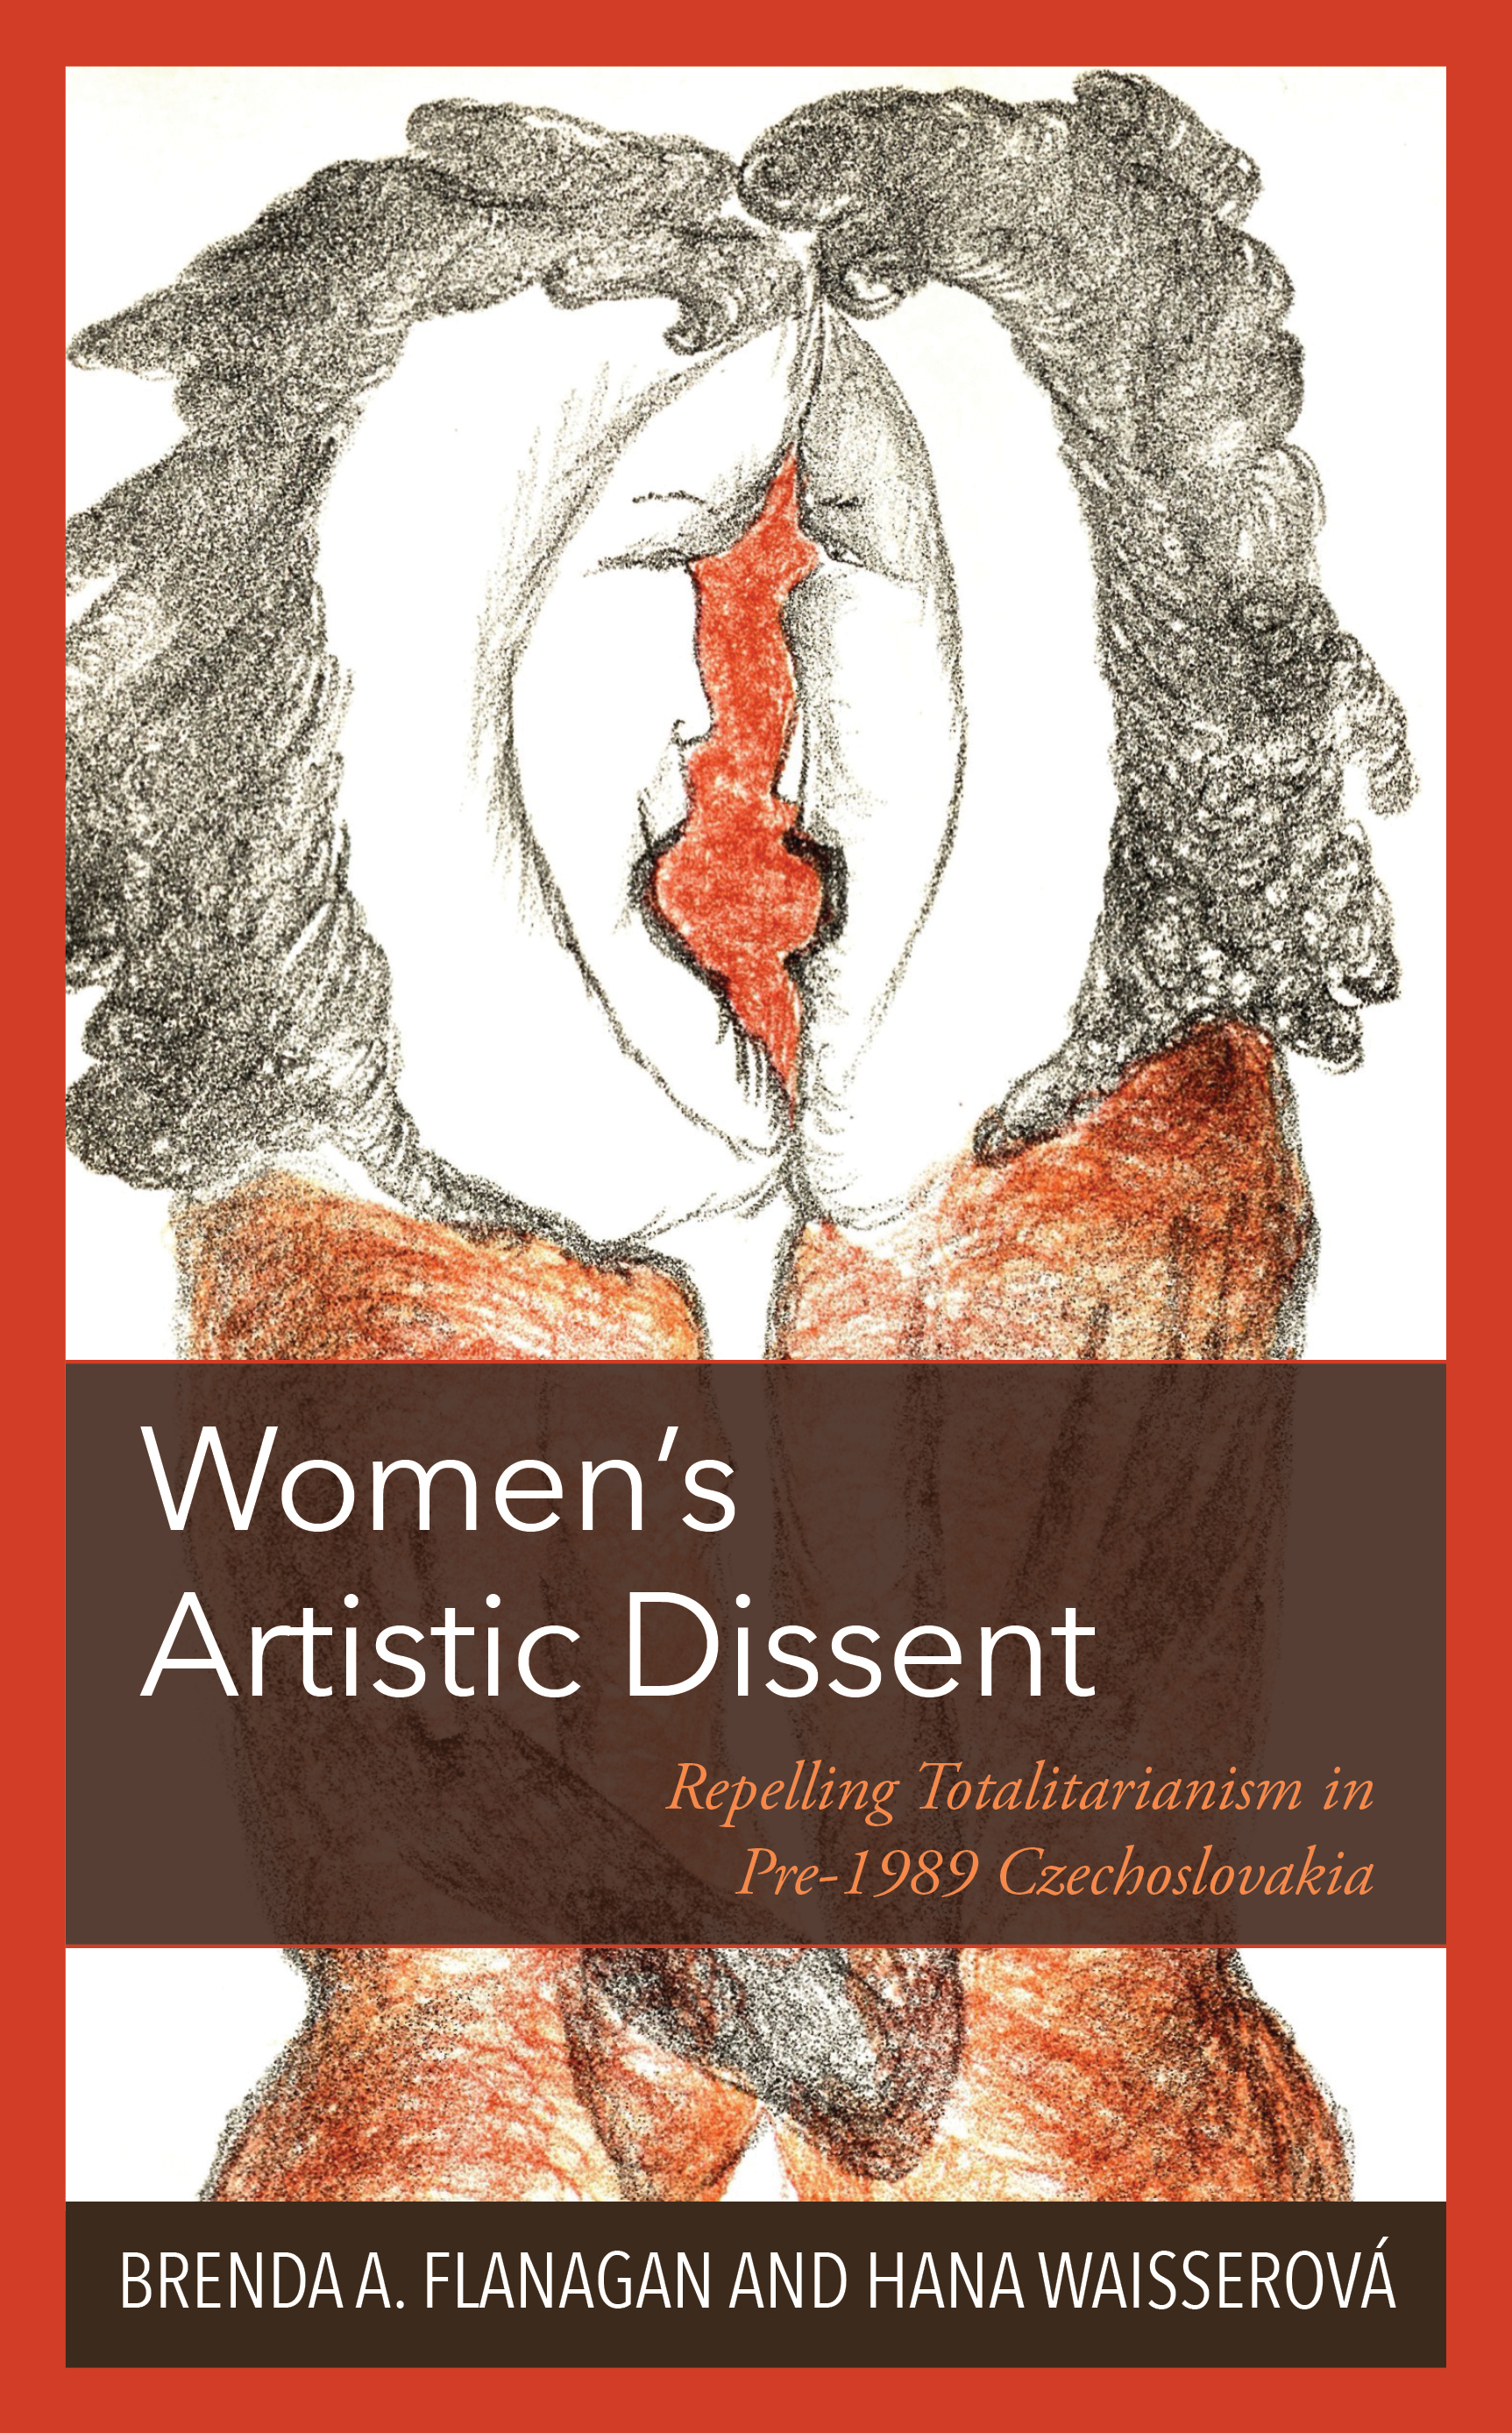 Women’s Artistic Dissent: Repelling Totalitarianism in Pre-1989 Czechoslovakia